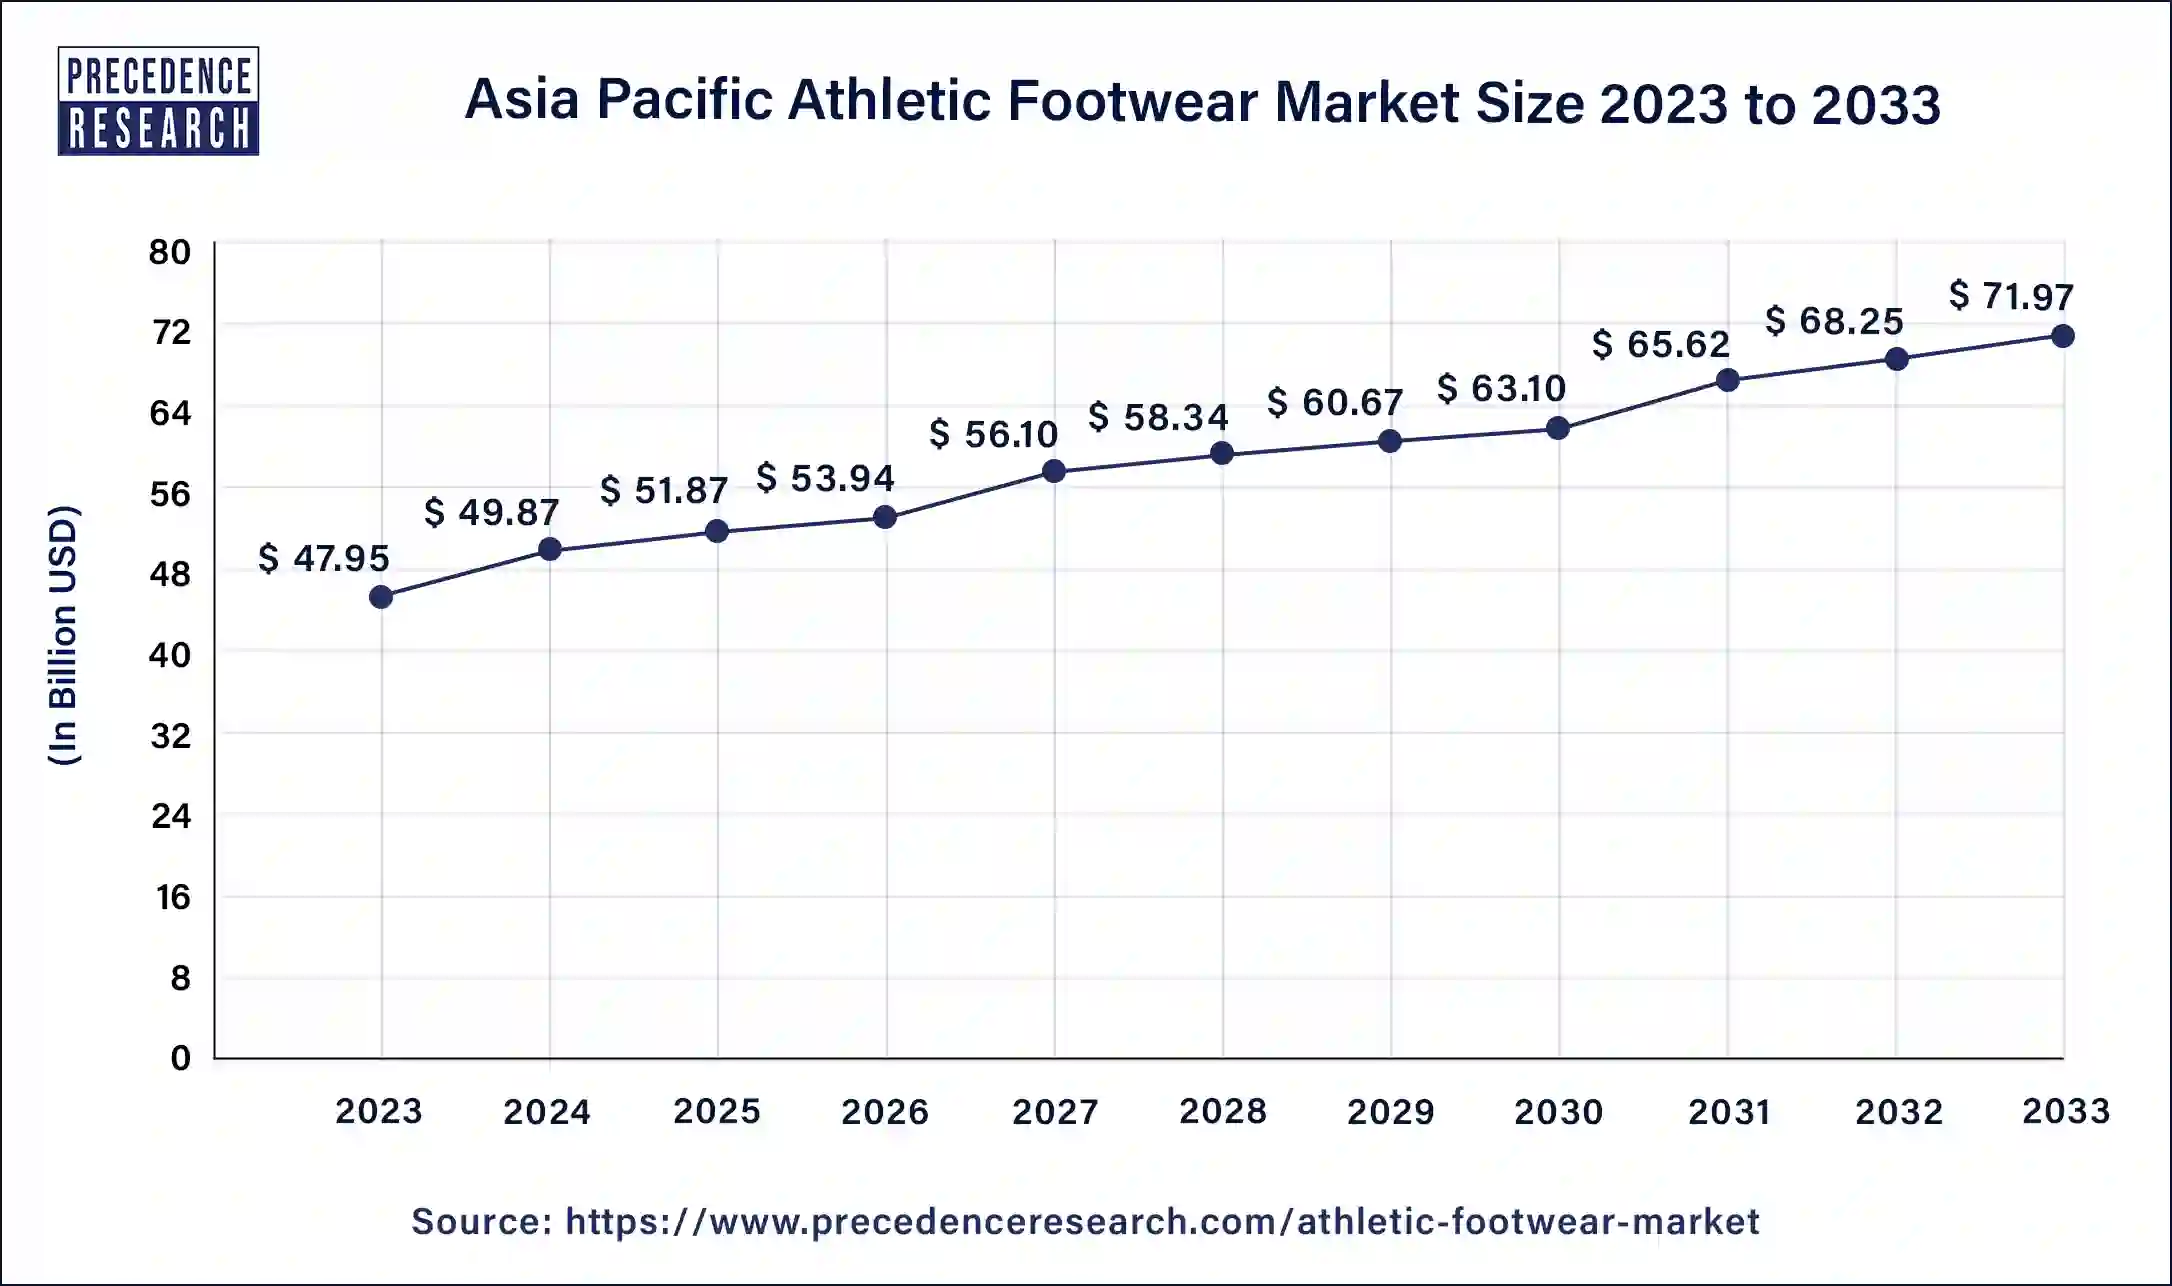 Asia Pacific Athletic Footwear Market Size 2024 to 2033